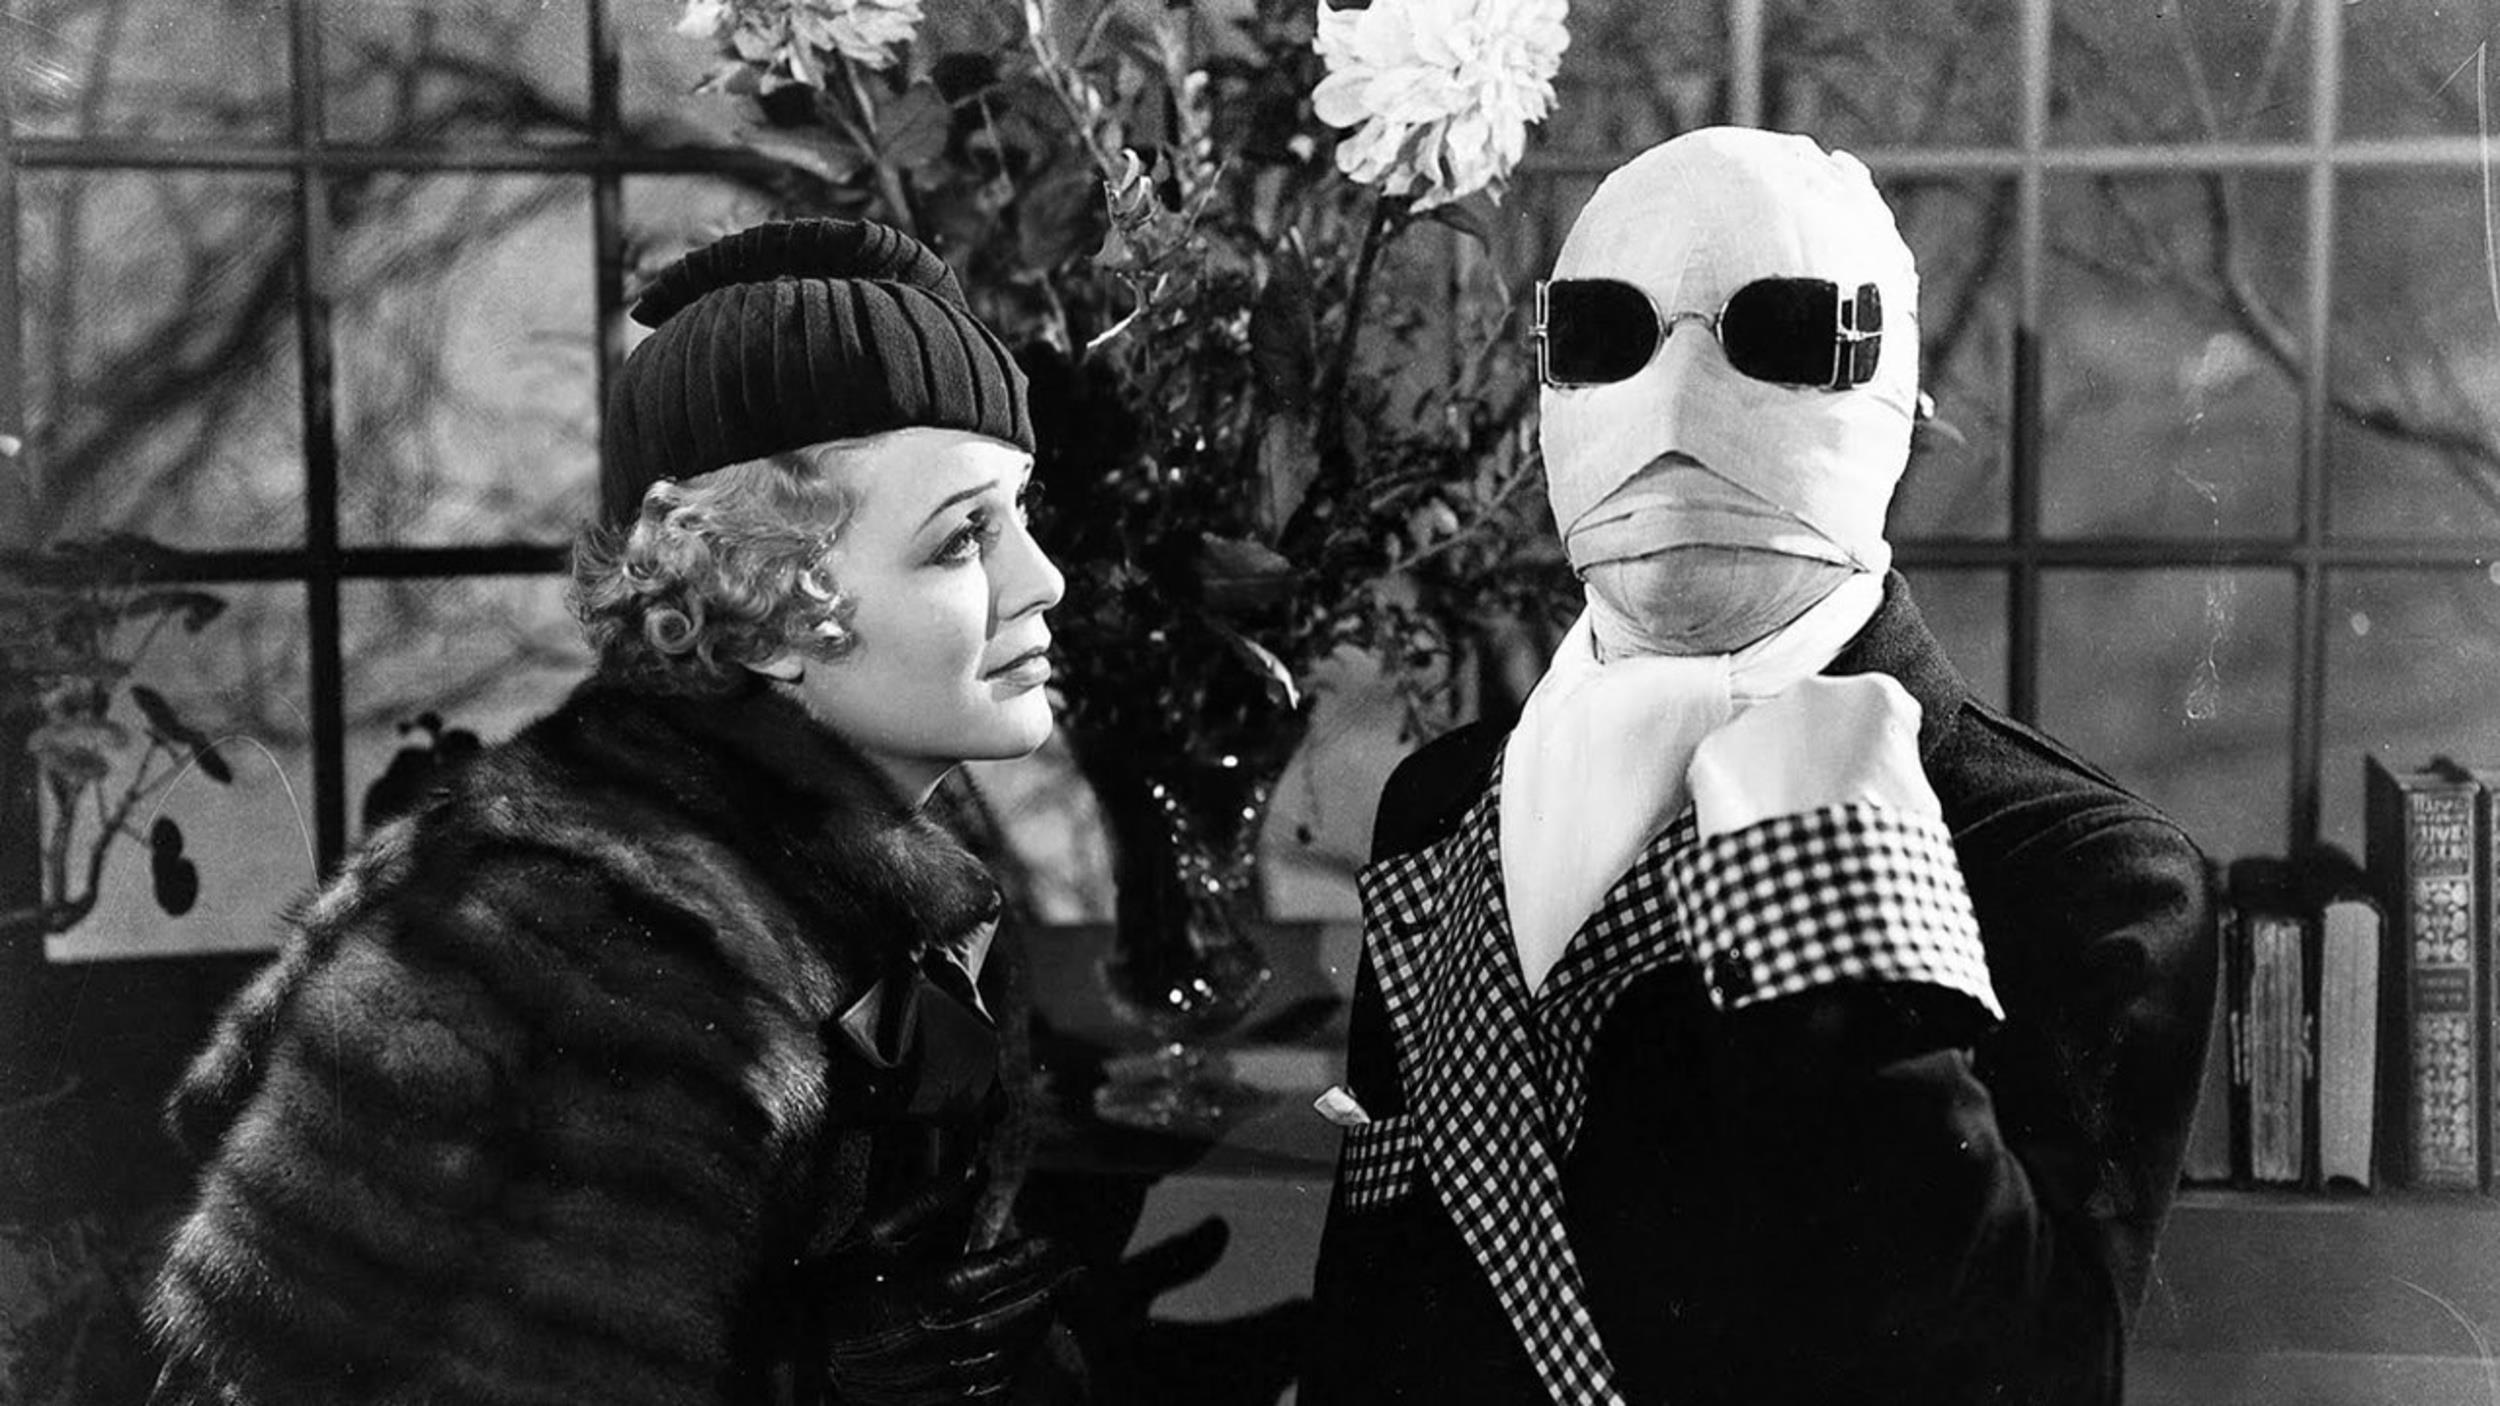 <p>Claude Rains is splendid as the ambitious chemist who “meddled in things that man must leave alone." The first film is a joy, featuring clever visual f/x from John P. Fulton, John J. Mescall and Frank D. Williams that deftly provided the illusion of invisibility. Vincent Price took over as the disembodied voice in the Joe May’s decent “The Invisible Man Returns," while Virginia Bruce gave the franchise a comedic spin as “The Invisible Woman." The best of the sequels is the WWII-set, Curt Siodmak-scripted “Invisible Agent," which was actual U.S. propaganda that finds Jon Hall trying to keep the invisibility formula out of the clutches of the Axis forces.</p><p><a href='https://www.msn.com/en-us/community/channel/vid-cj9pqbr0vn9in2b6ddcd8sfgpfq6x6utp44fssrv6mc2gtybw0us'>Follow us on MSN to see more of our exclusive entertainment content.</a></p>